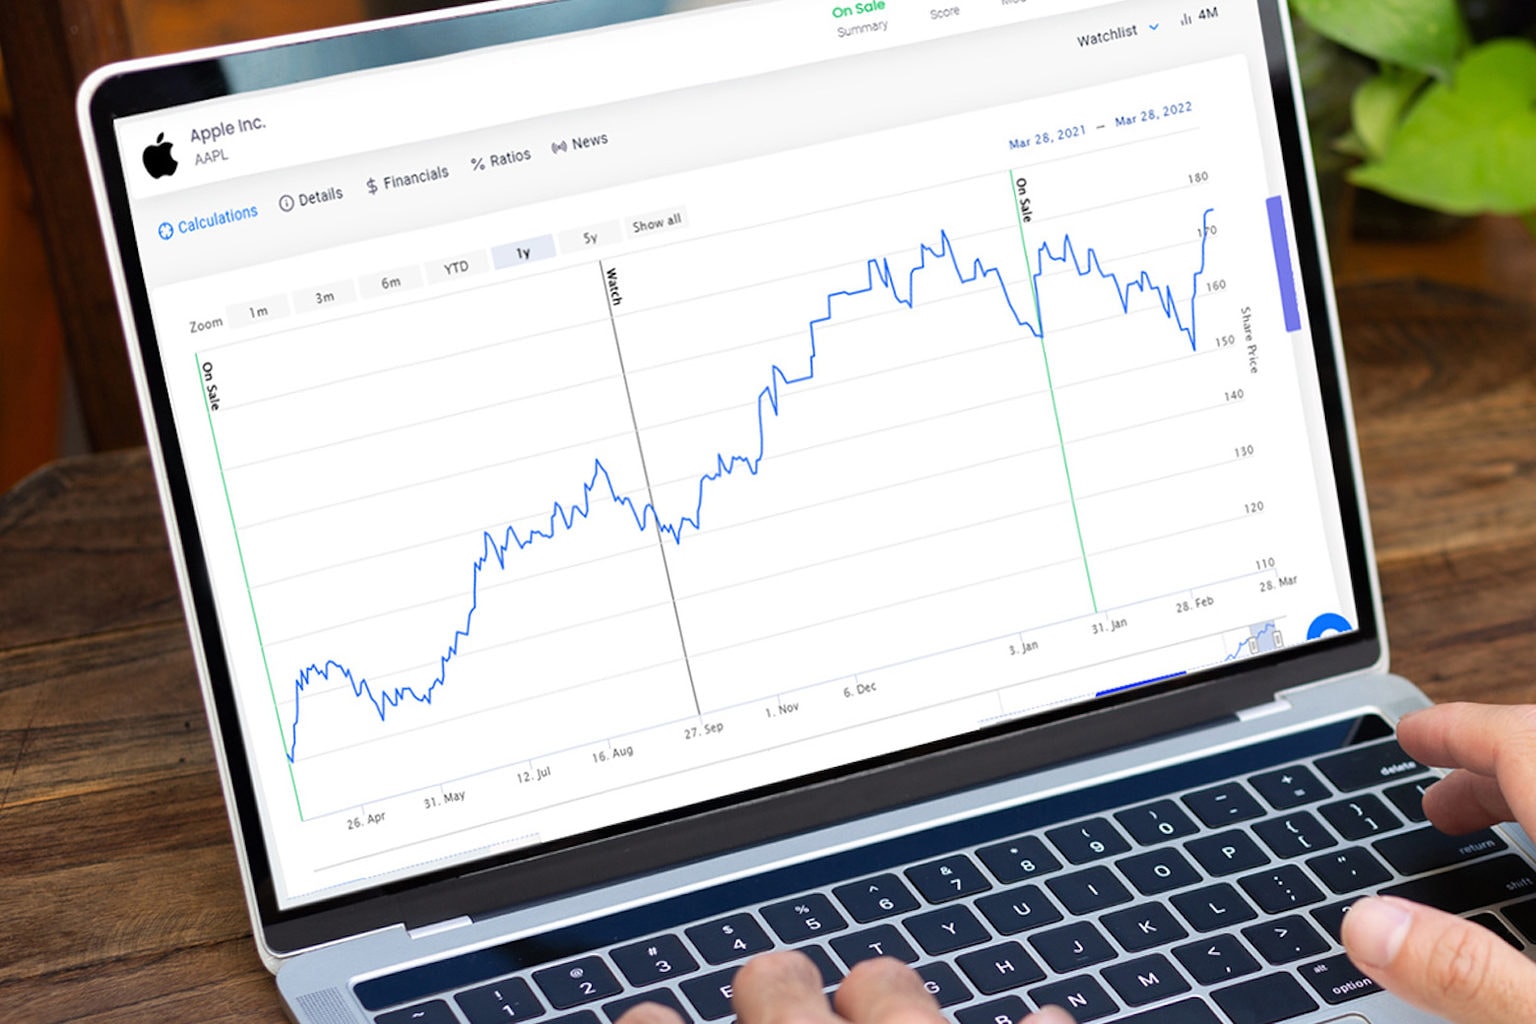 Grab a stock screener investment tool that's 86% off for a lifetime subscription.